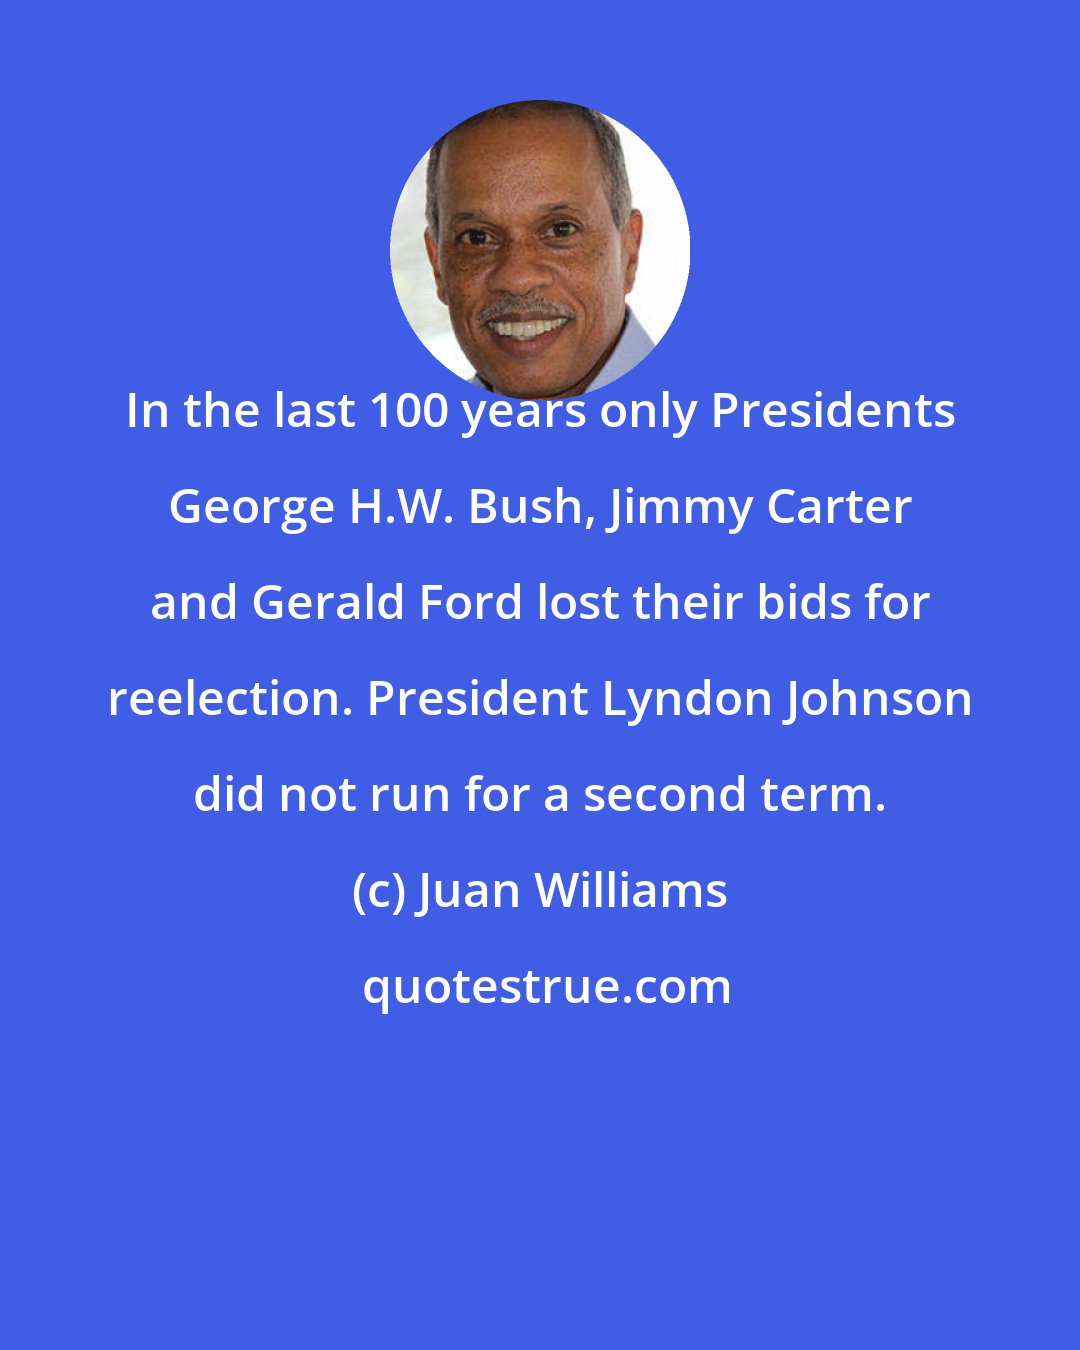 Juan Williams: In the last 100 years only Presidents George H.W. Bush, Jimmy Carter and Gerald Ford lost their bids for reelection. President Lyndon Johnson did not run for a second term.